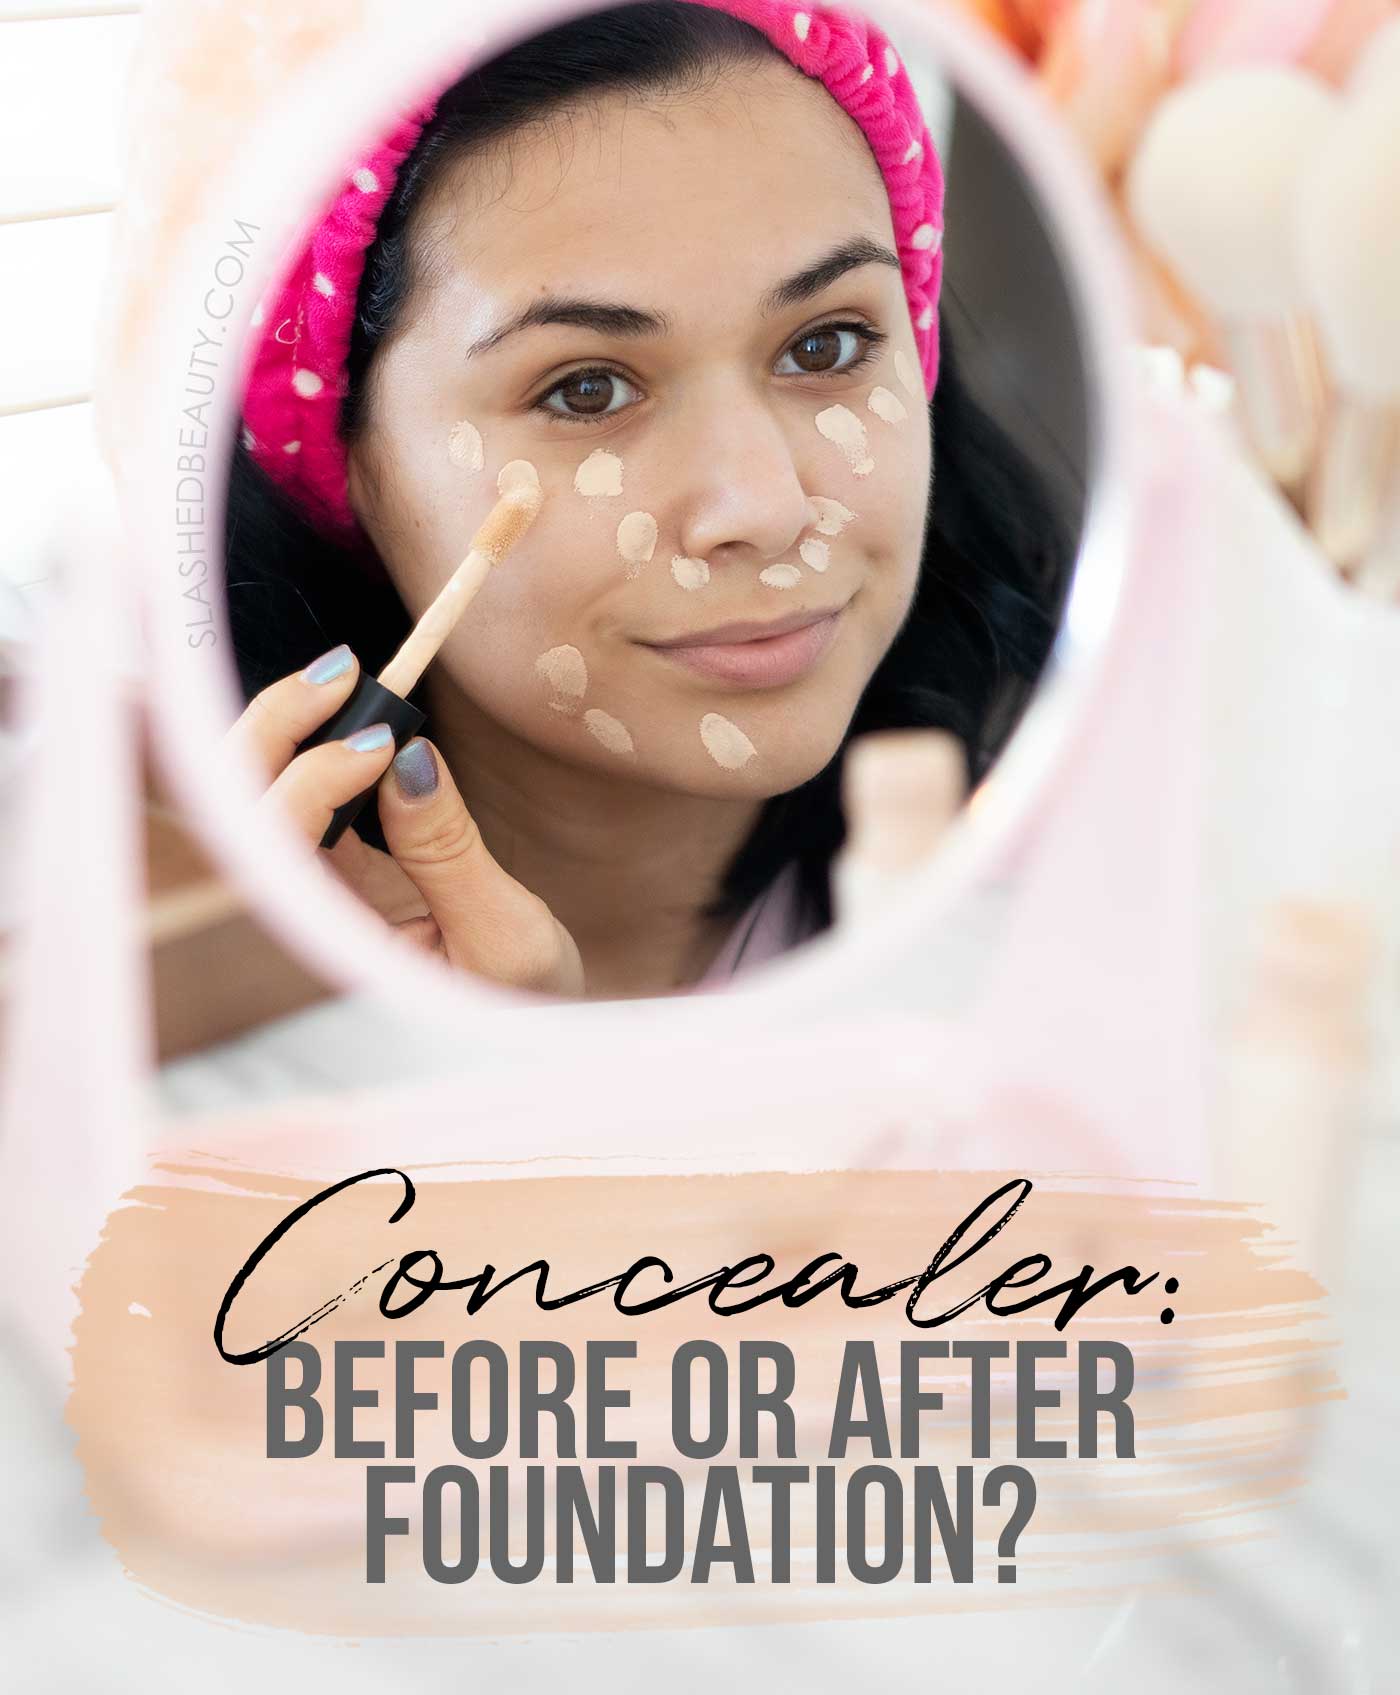 Do You Apply Concealer or Foundation First? | What order to apply foundation and concealer | Slashed Beauty